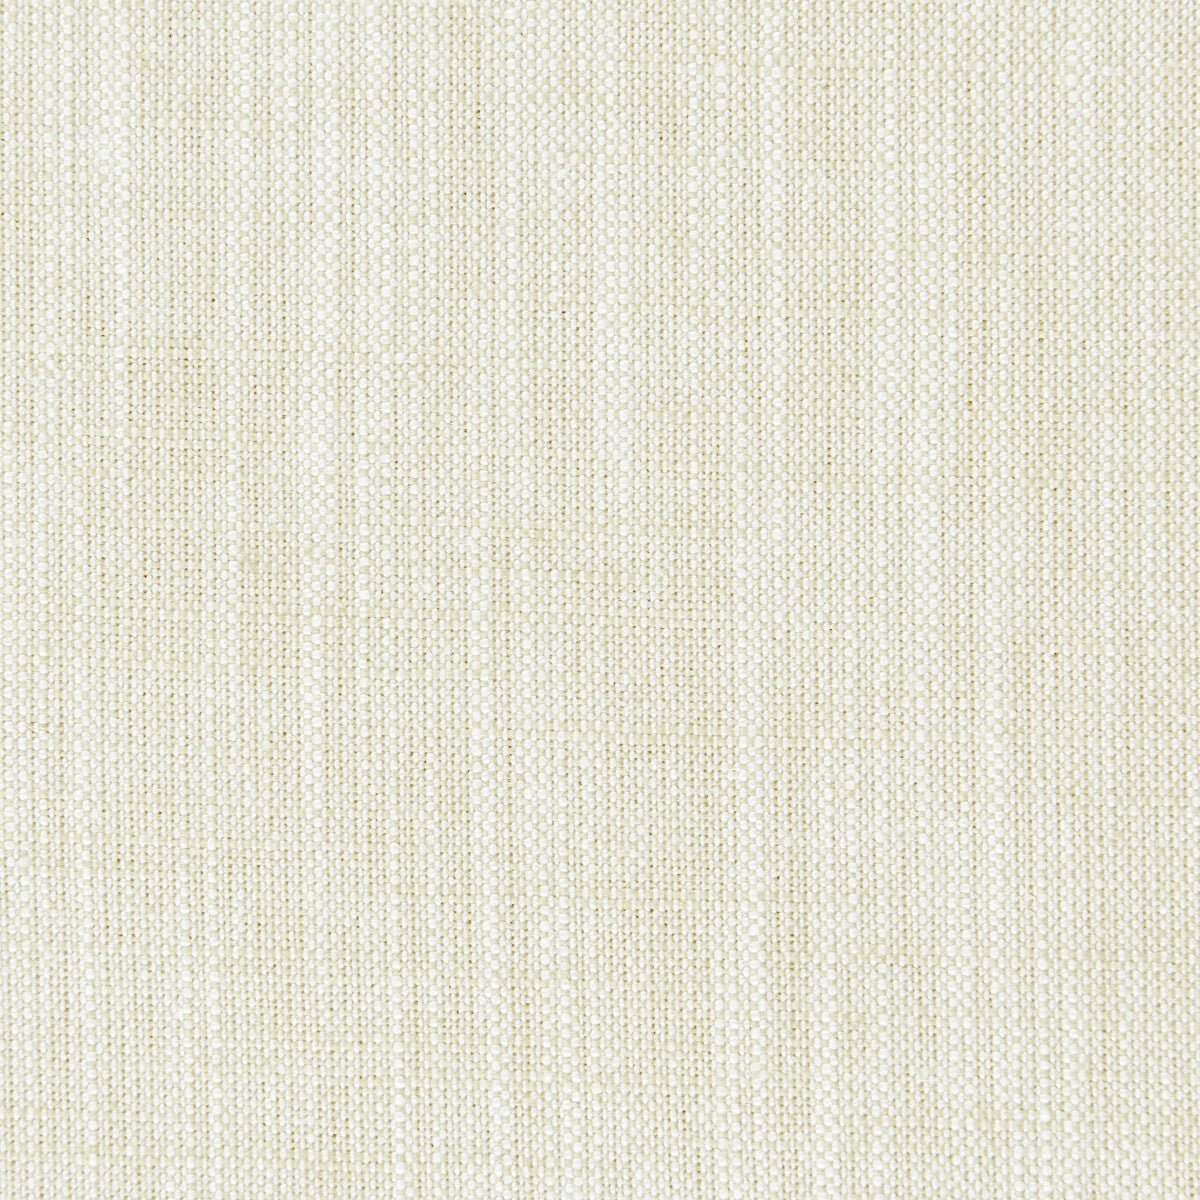 Biarritz fabric in oyster color - pattern F0965/34.CAC.0 - by Clarke And Clarke in the Clarke &amp; Clarke Biarritz collection